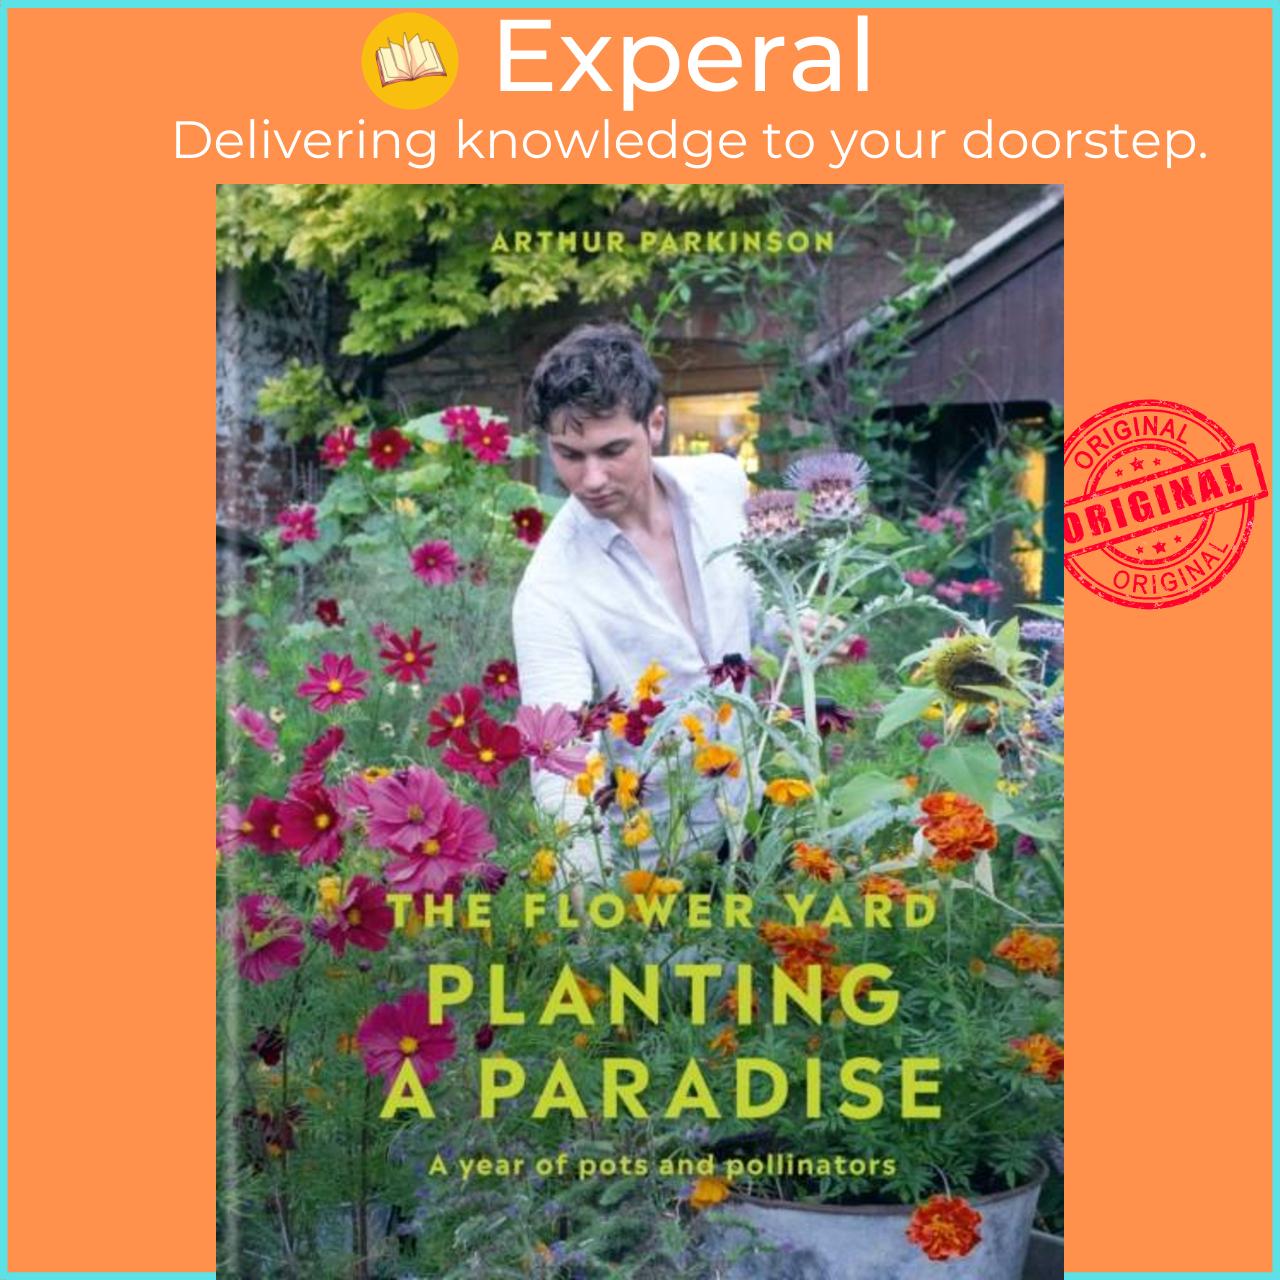 Sách - Planting a Paradise - A year of pots and pollinators - THE SUNDAY TIM by Arthur Parkinson (UK edition, hardcover)